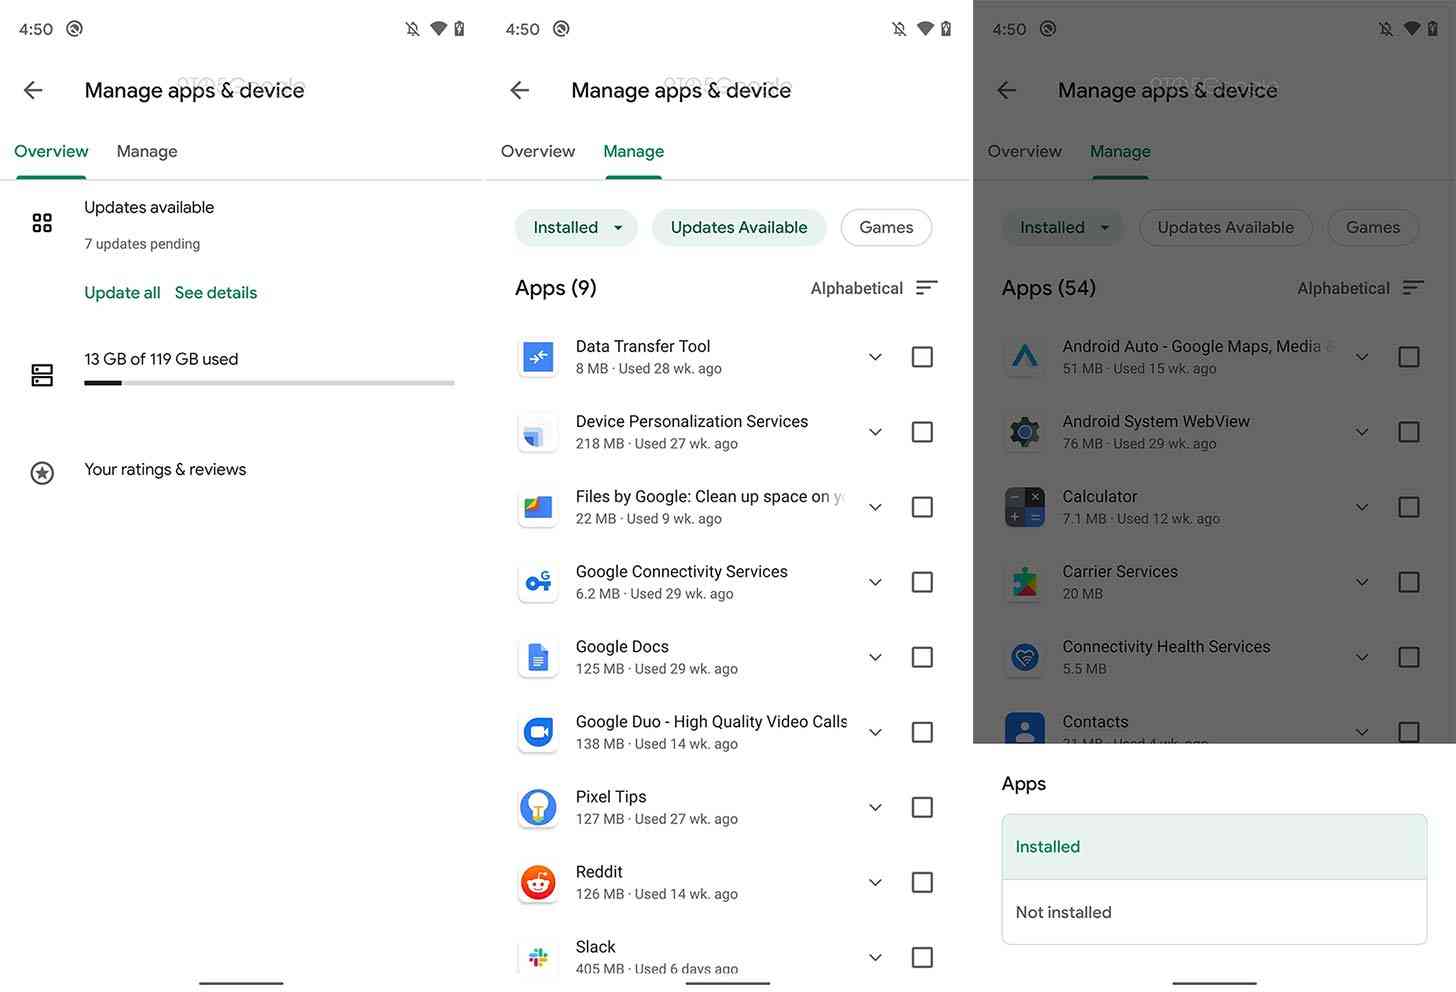 Google Play Store "My apps & games" redesign leak